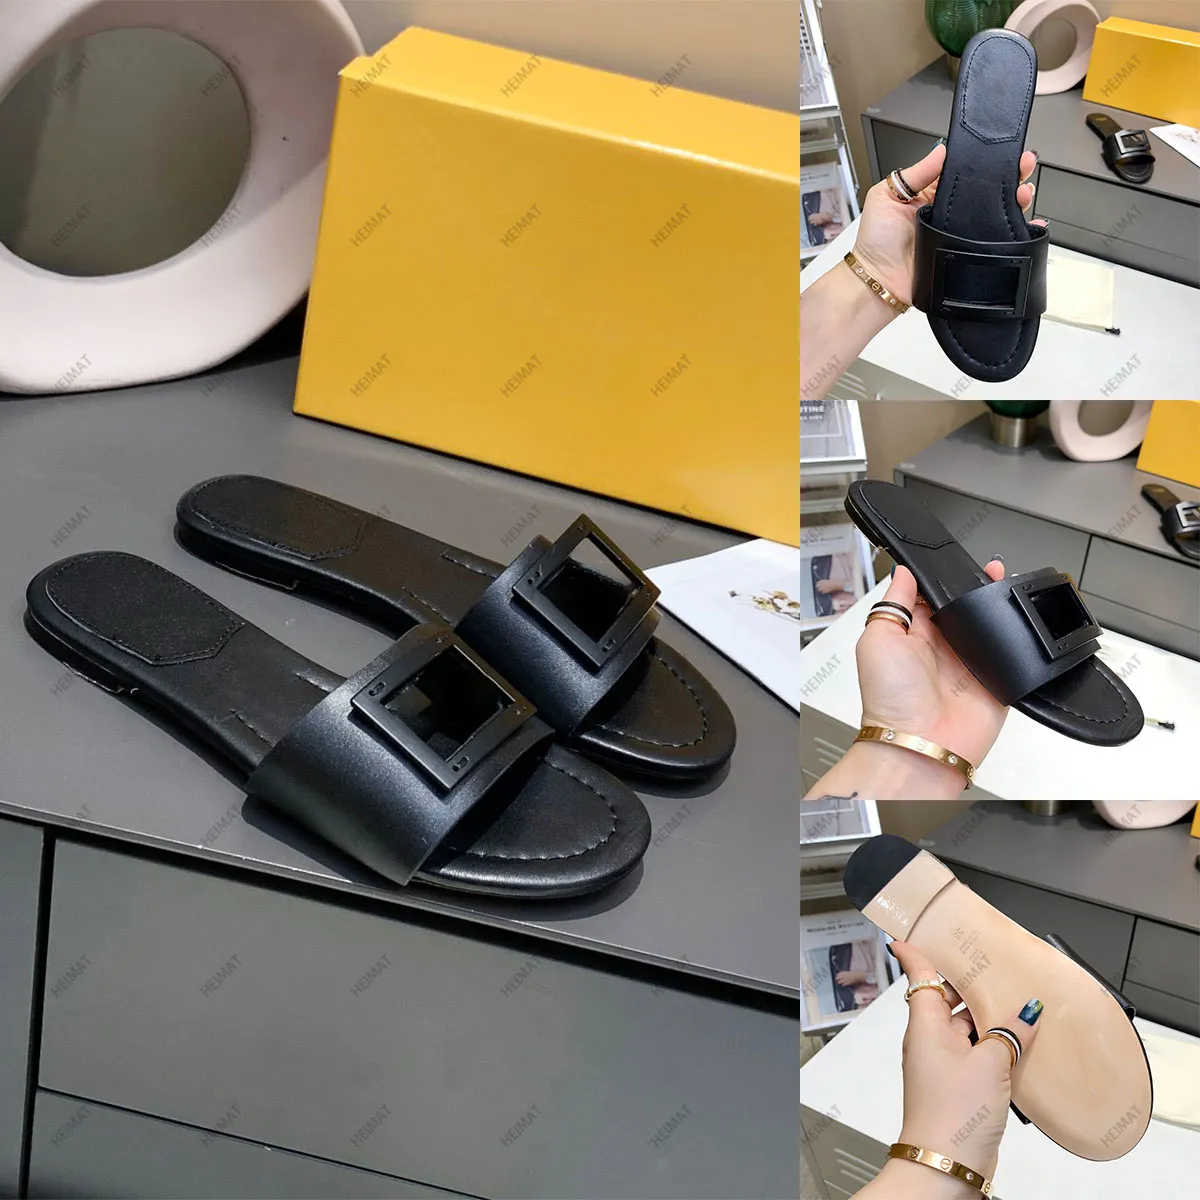 Designer Women Sandals Slippers Fashion Beach Flats Leather Material F metal material Logo Fashion Casual Shoes Beach Sandals with Box and Dust Bag 35-42